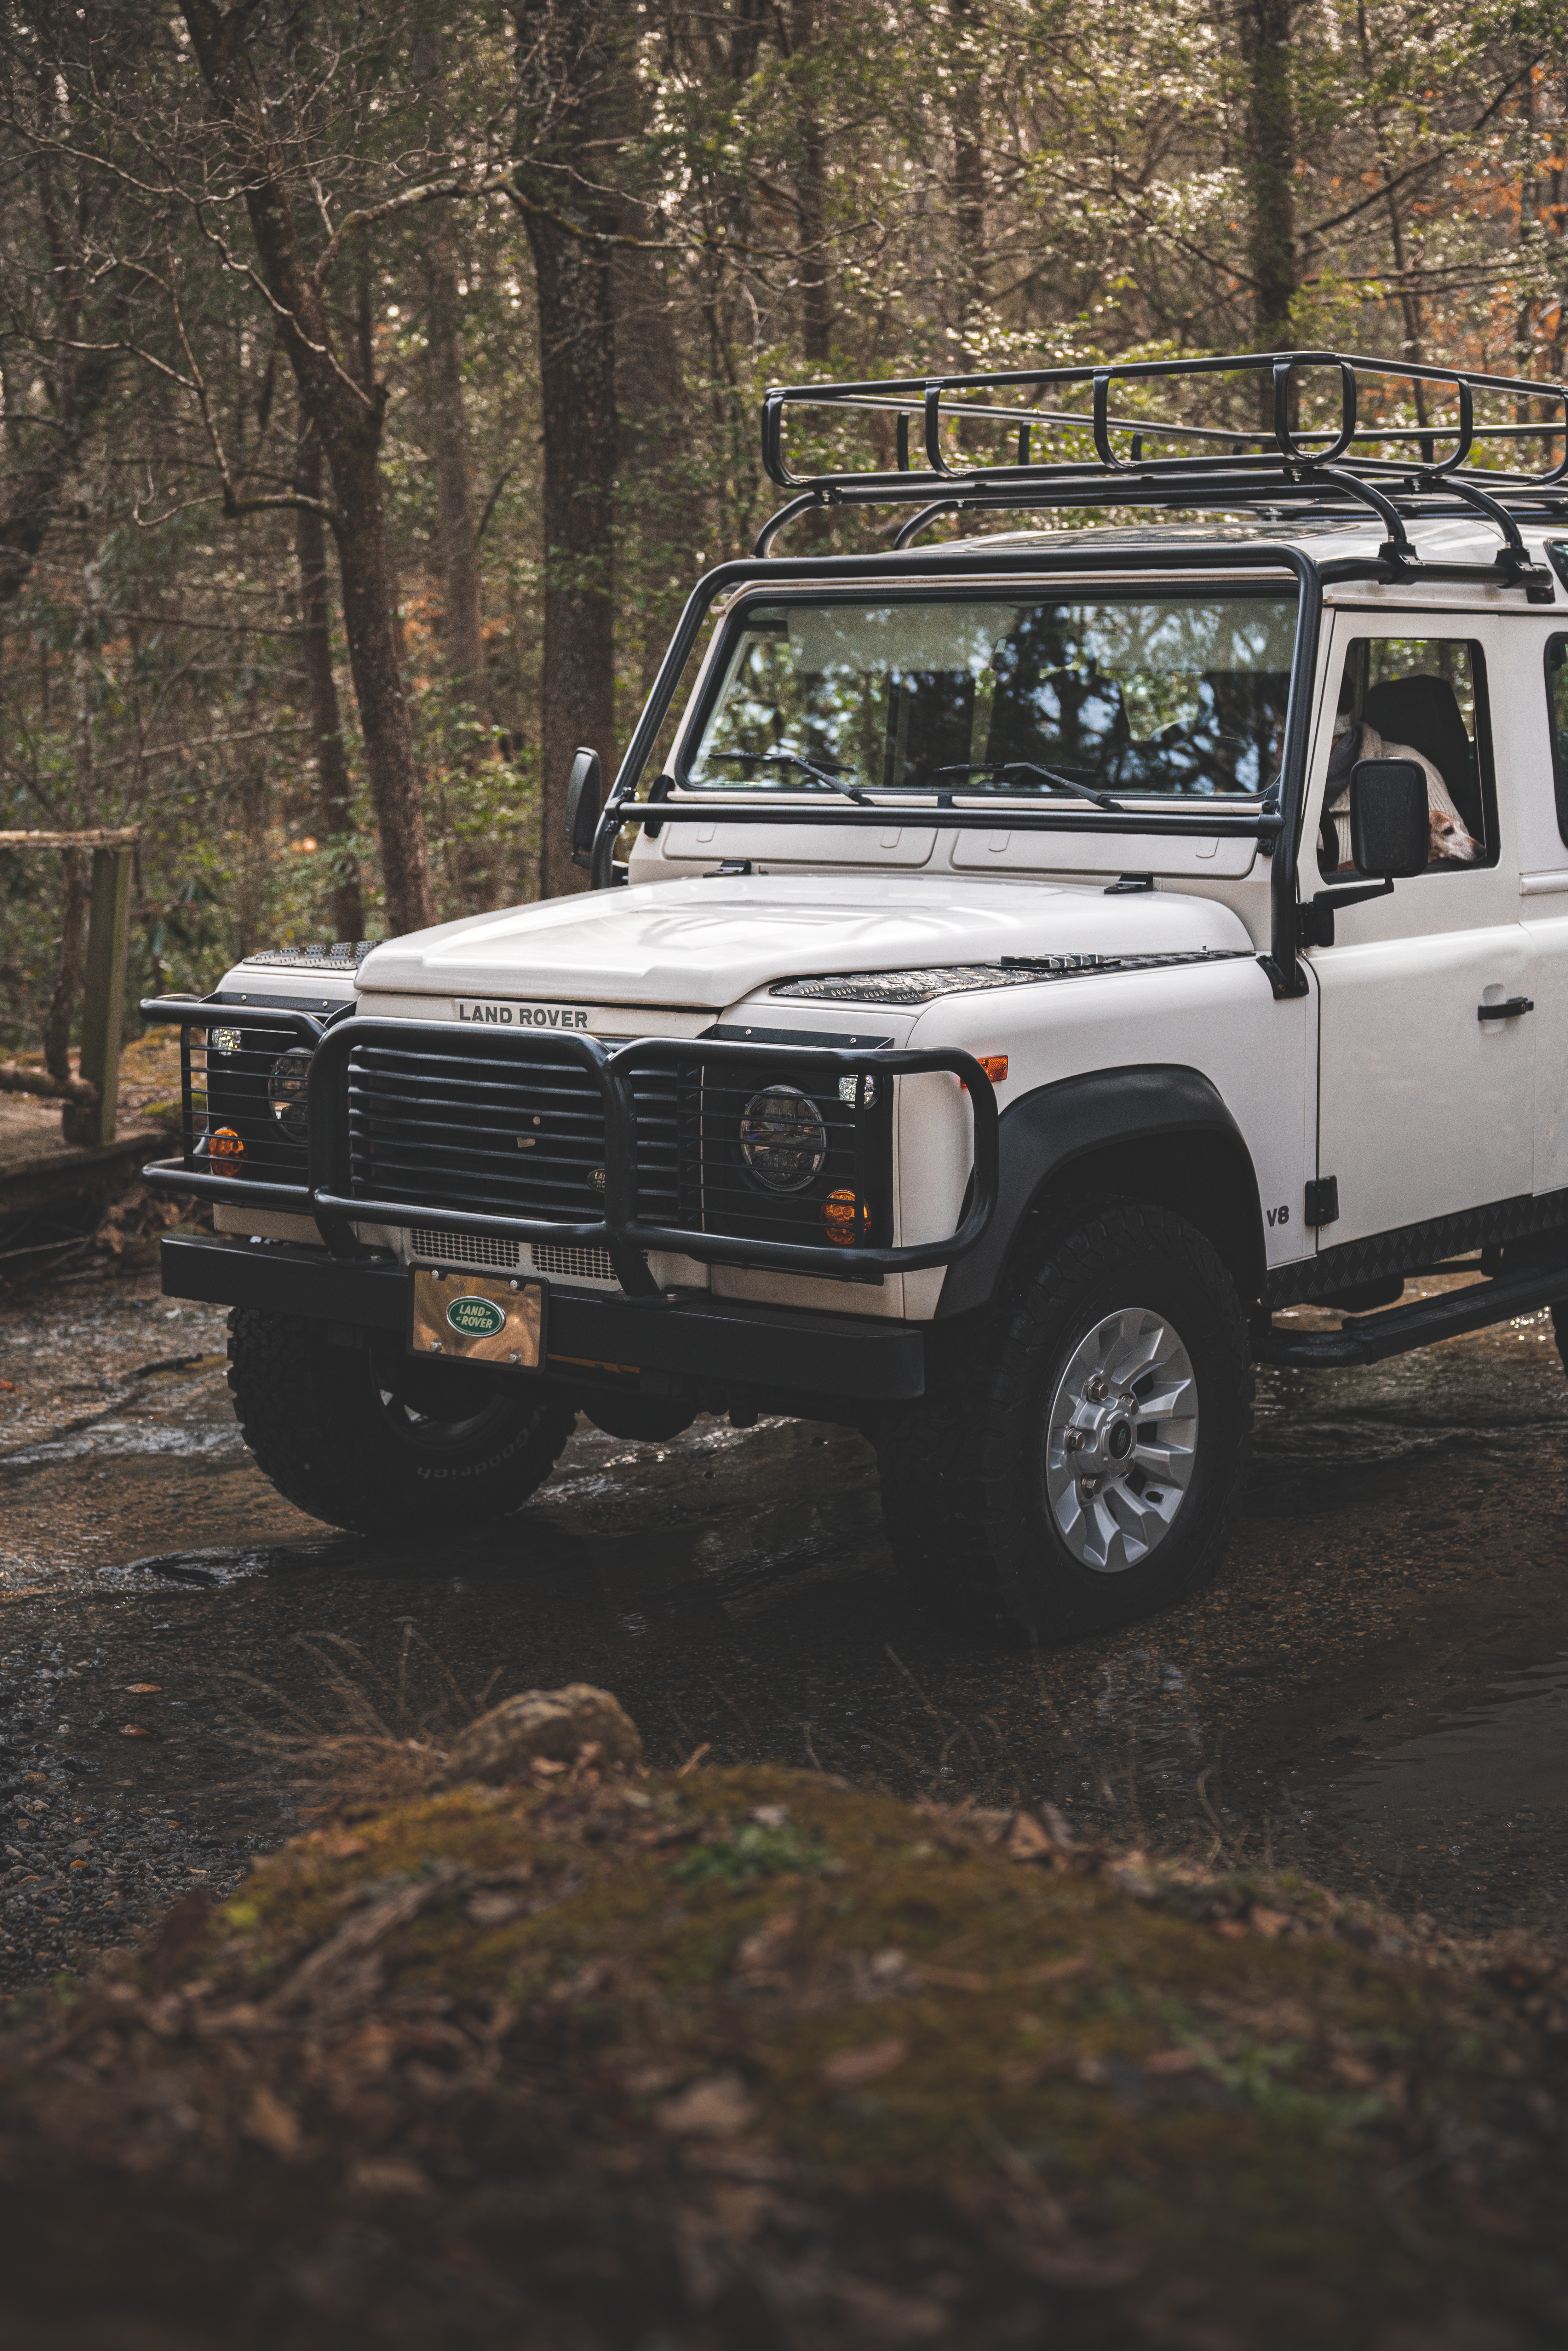 land rover, land rover defender, machine, cars, white, car, suv, jeep Full HD